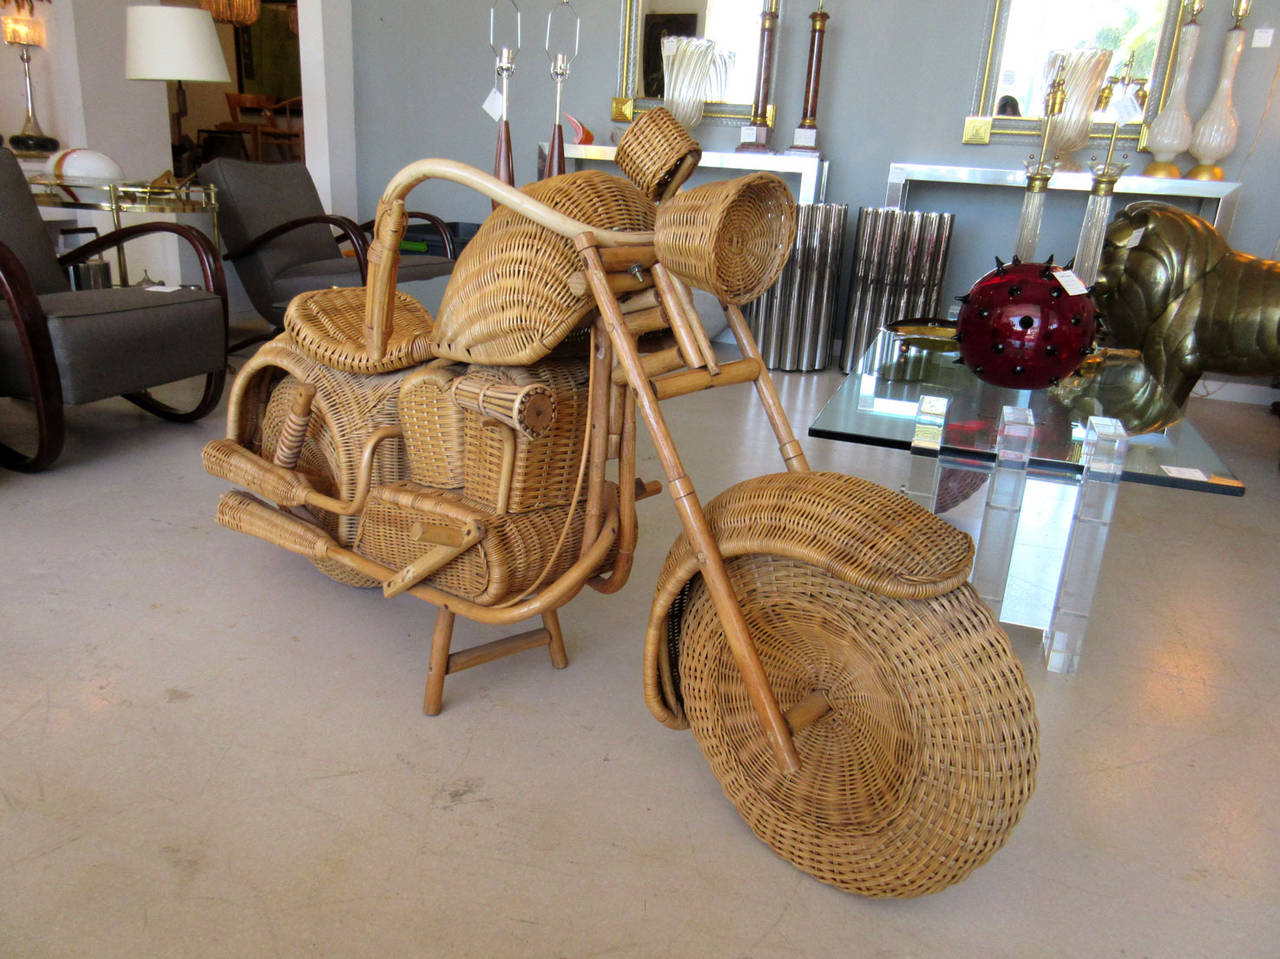 Vintage wicker motorcycle made with precise detailing that includes dual exhaust, rear suspension coils and handle bar brakes.